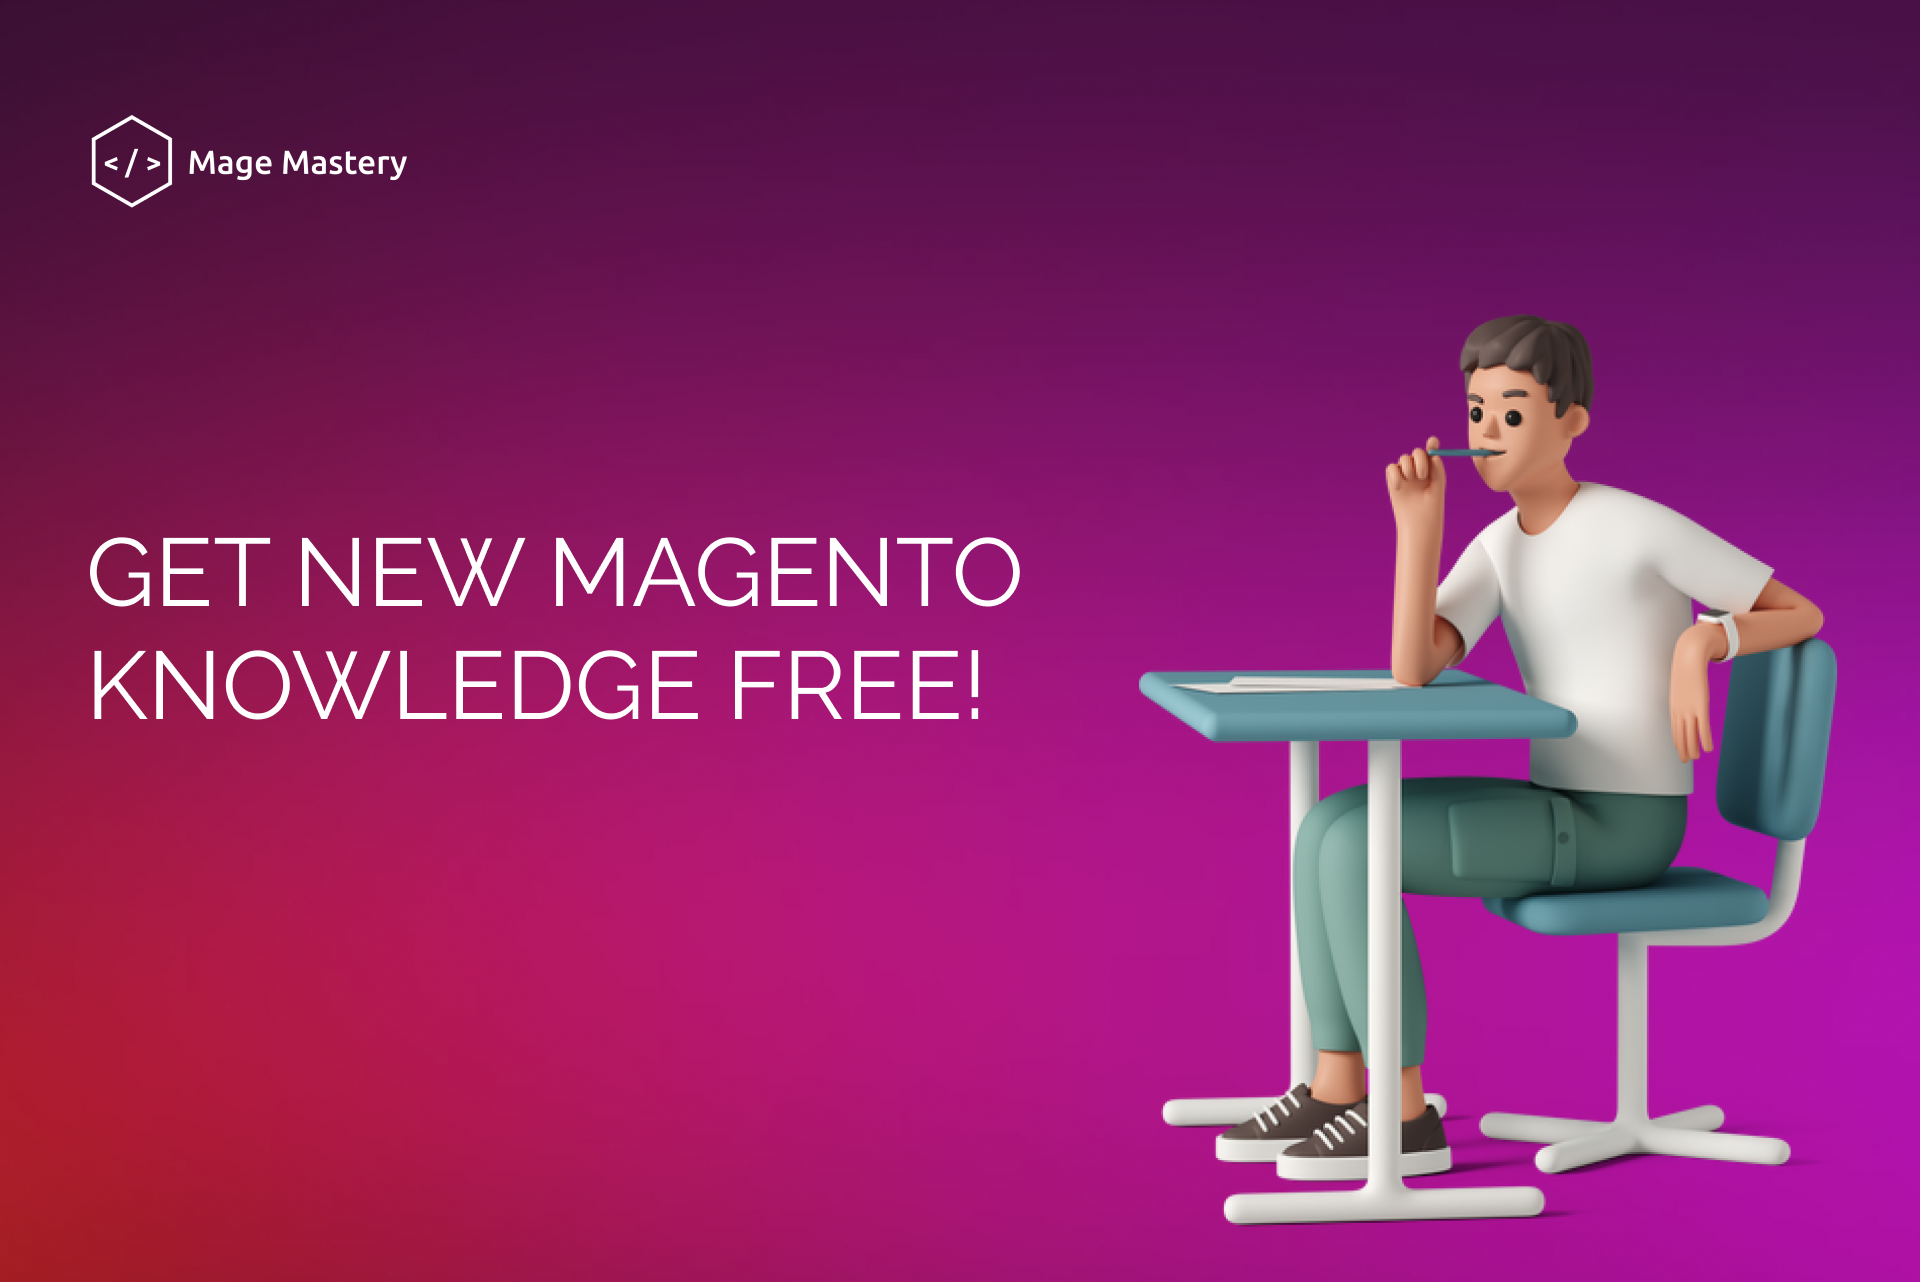 Start your career working with Magento by studying for free!